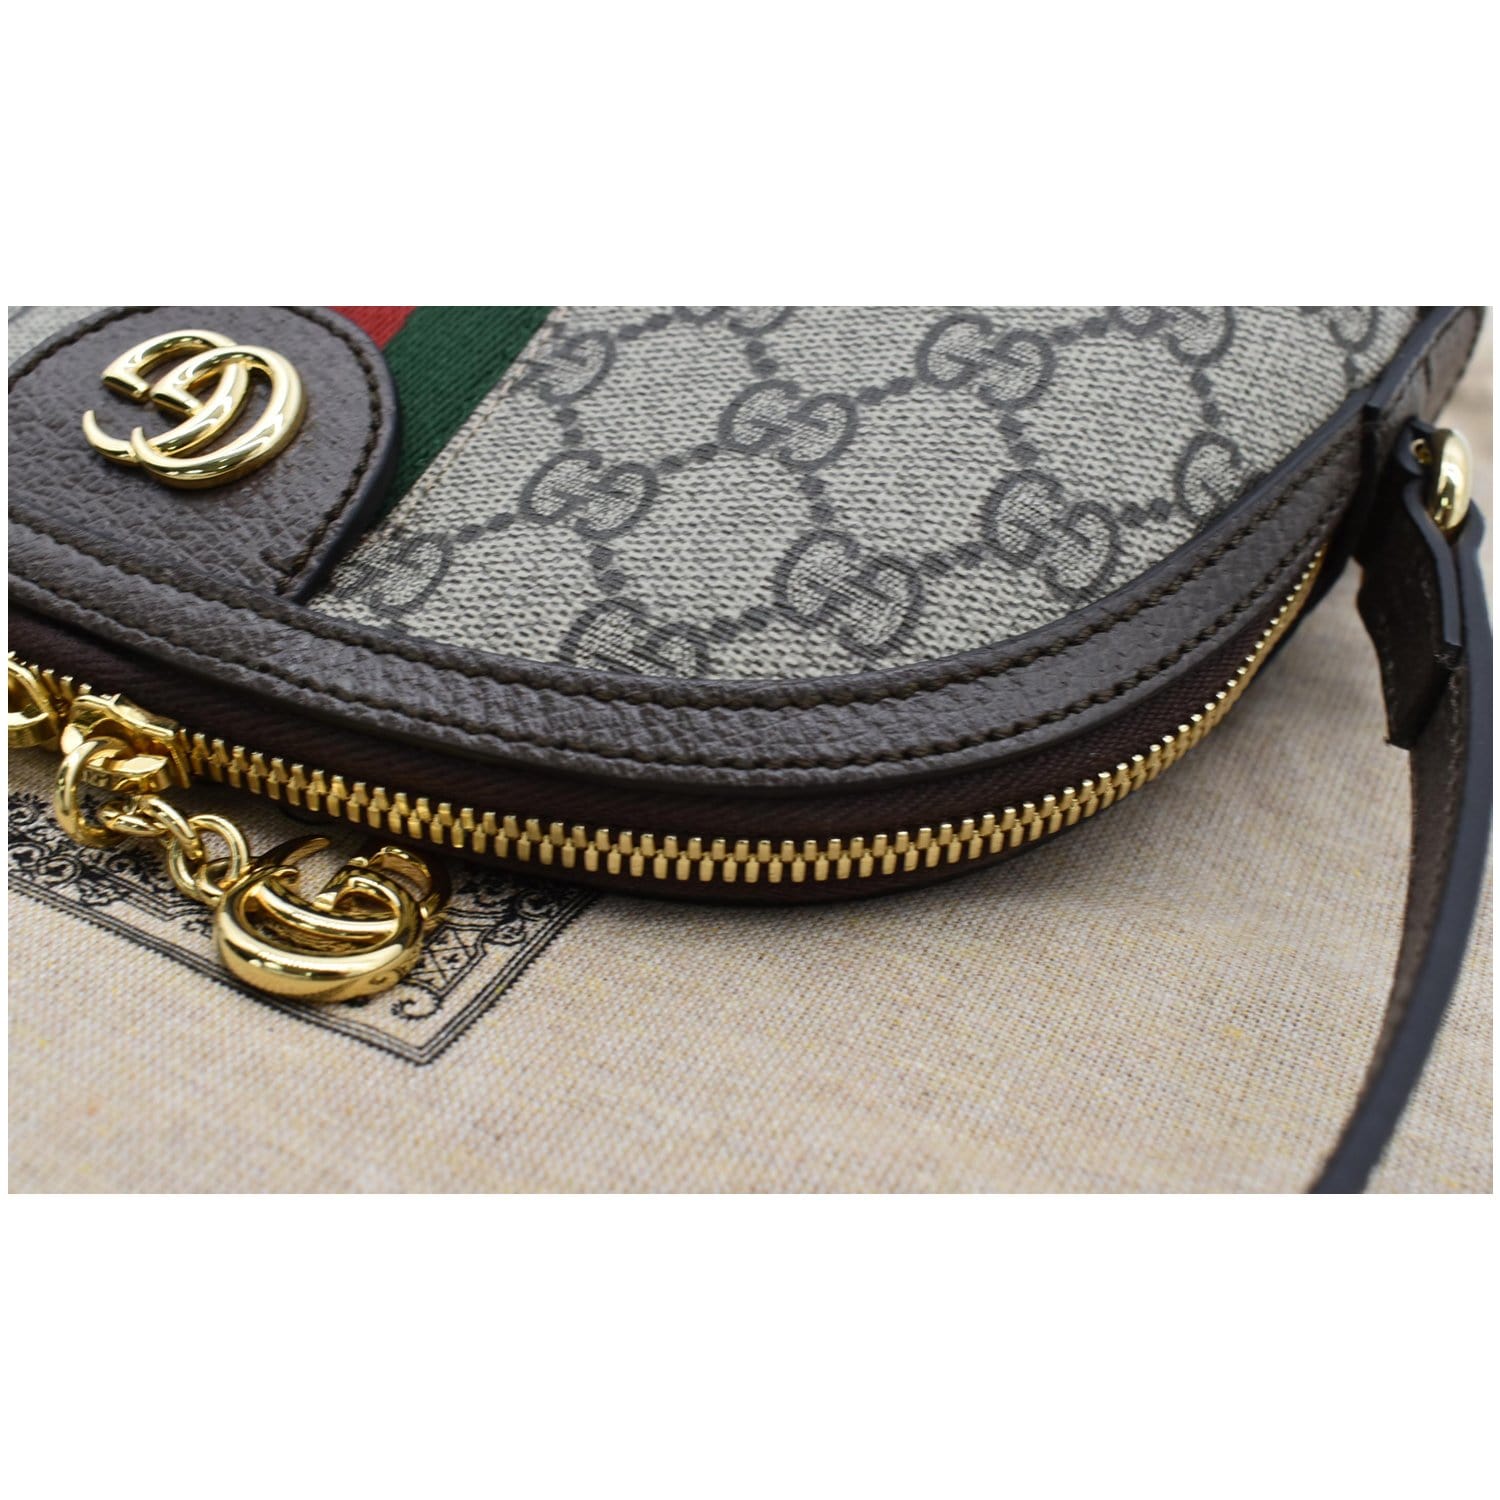 Gucci Ophidia Messenger Bag Small GG Supreme Beige/Ebony in Canvas/Leather  with Gold-tone - US